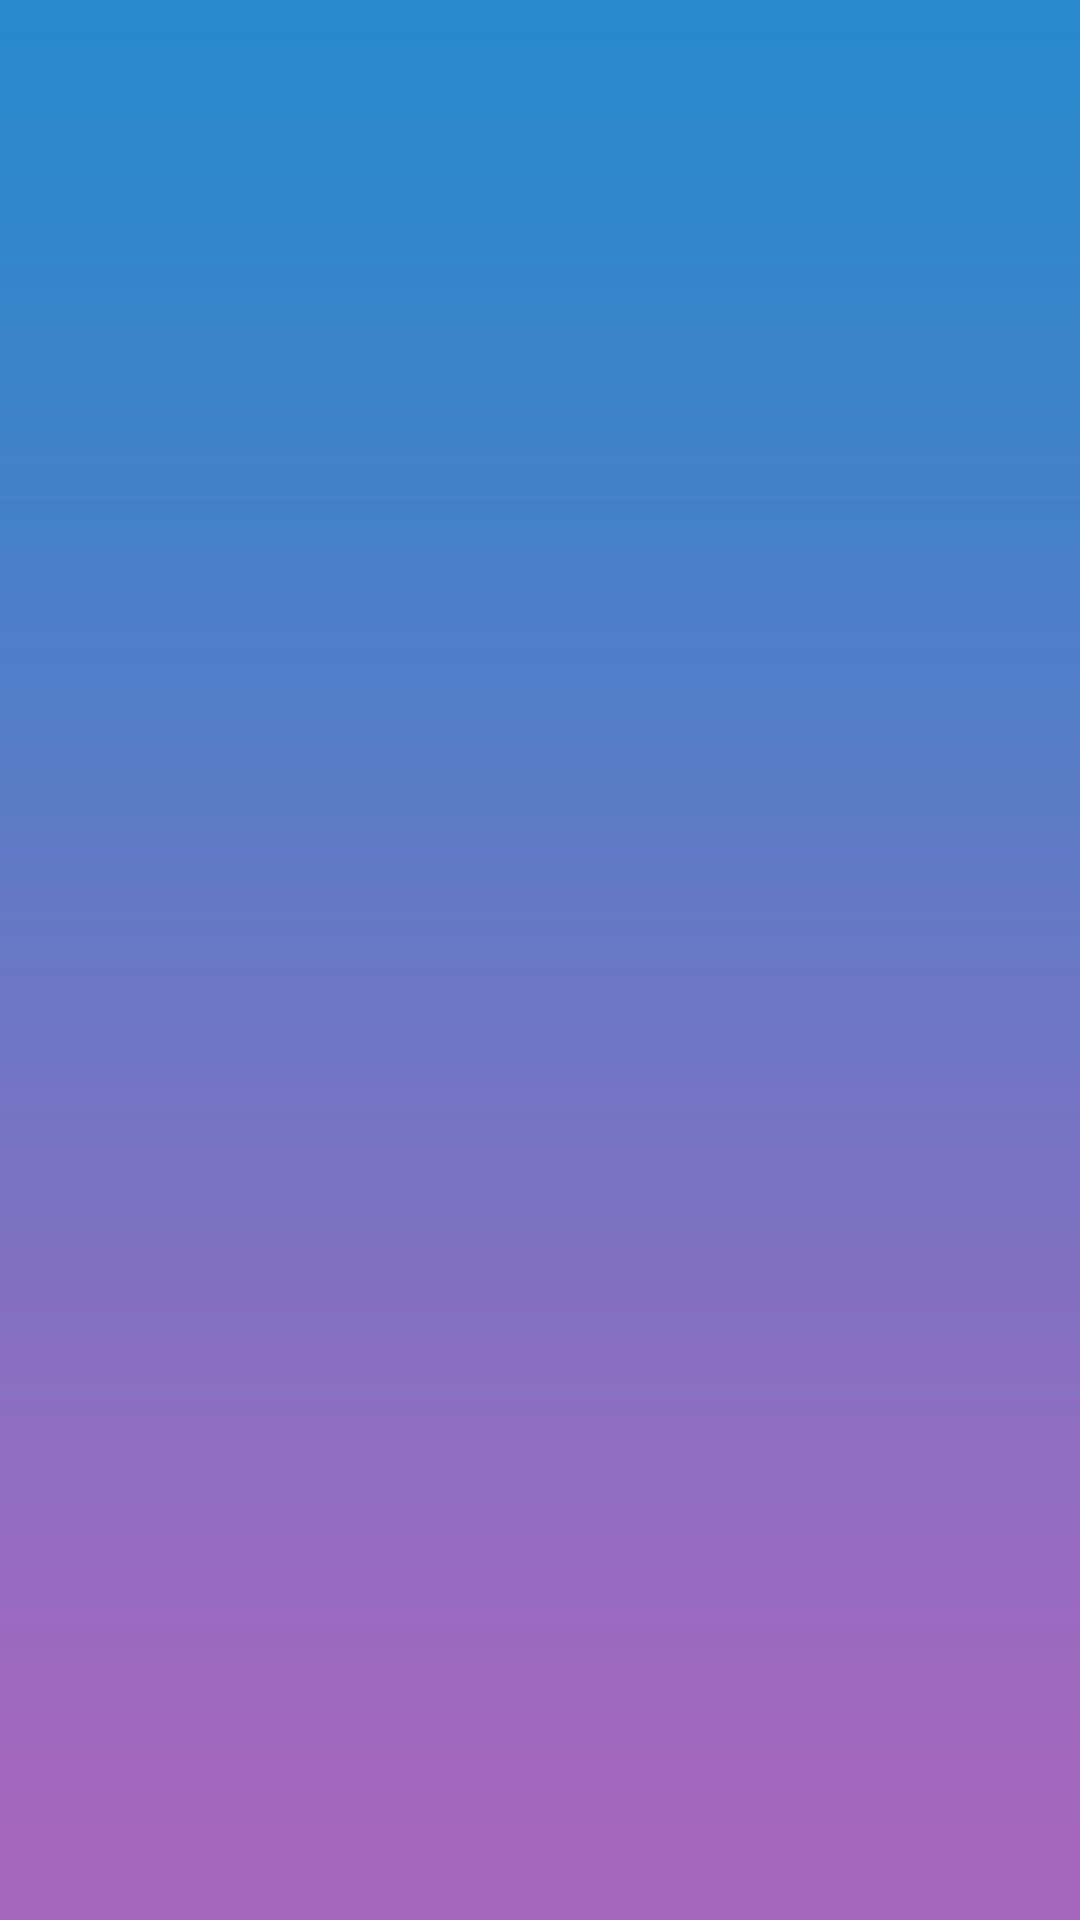 Stylish gradient phone for on-trend tech lovers Wallpaper